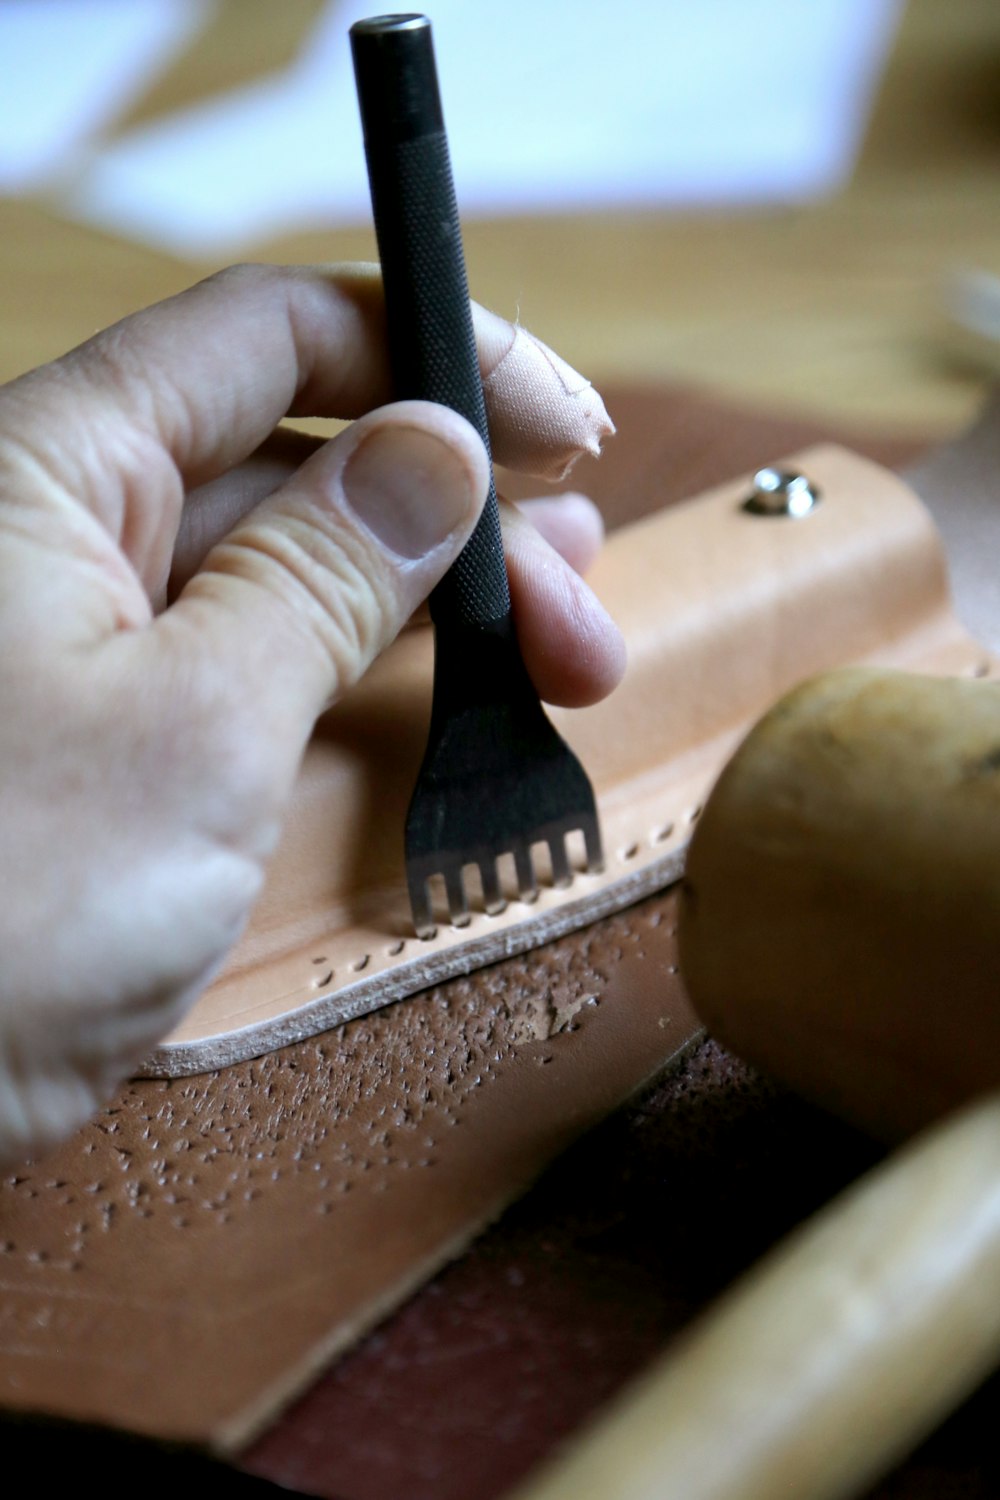 We use traditional tools to handcraft our leather goods.